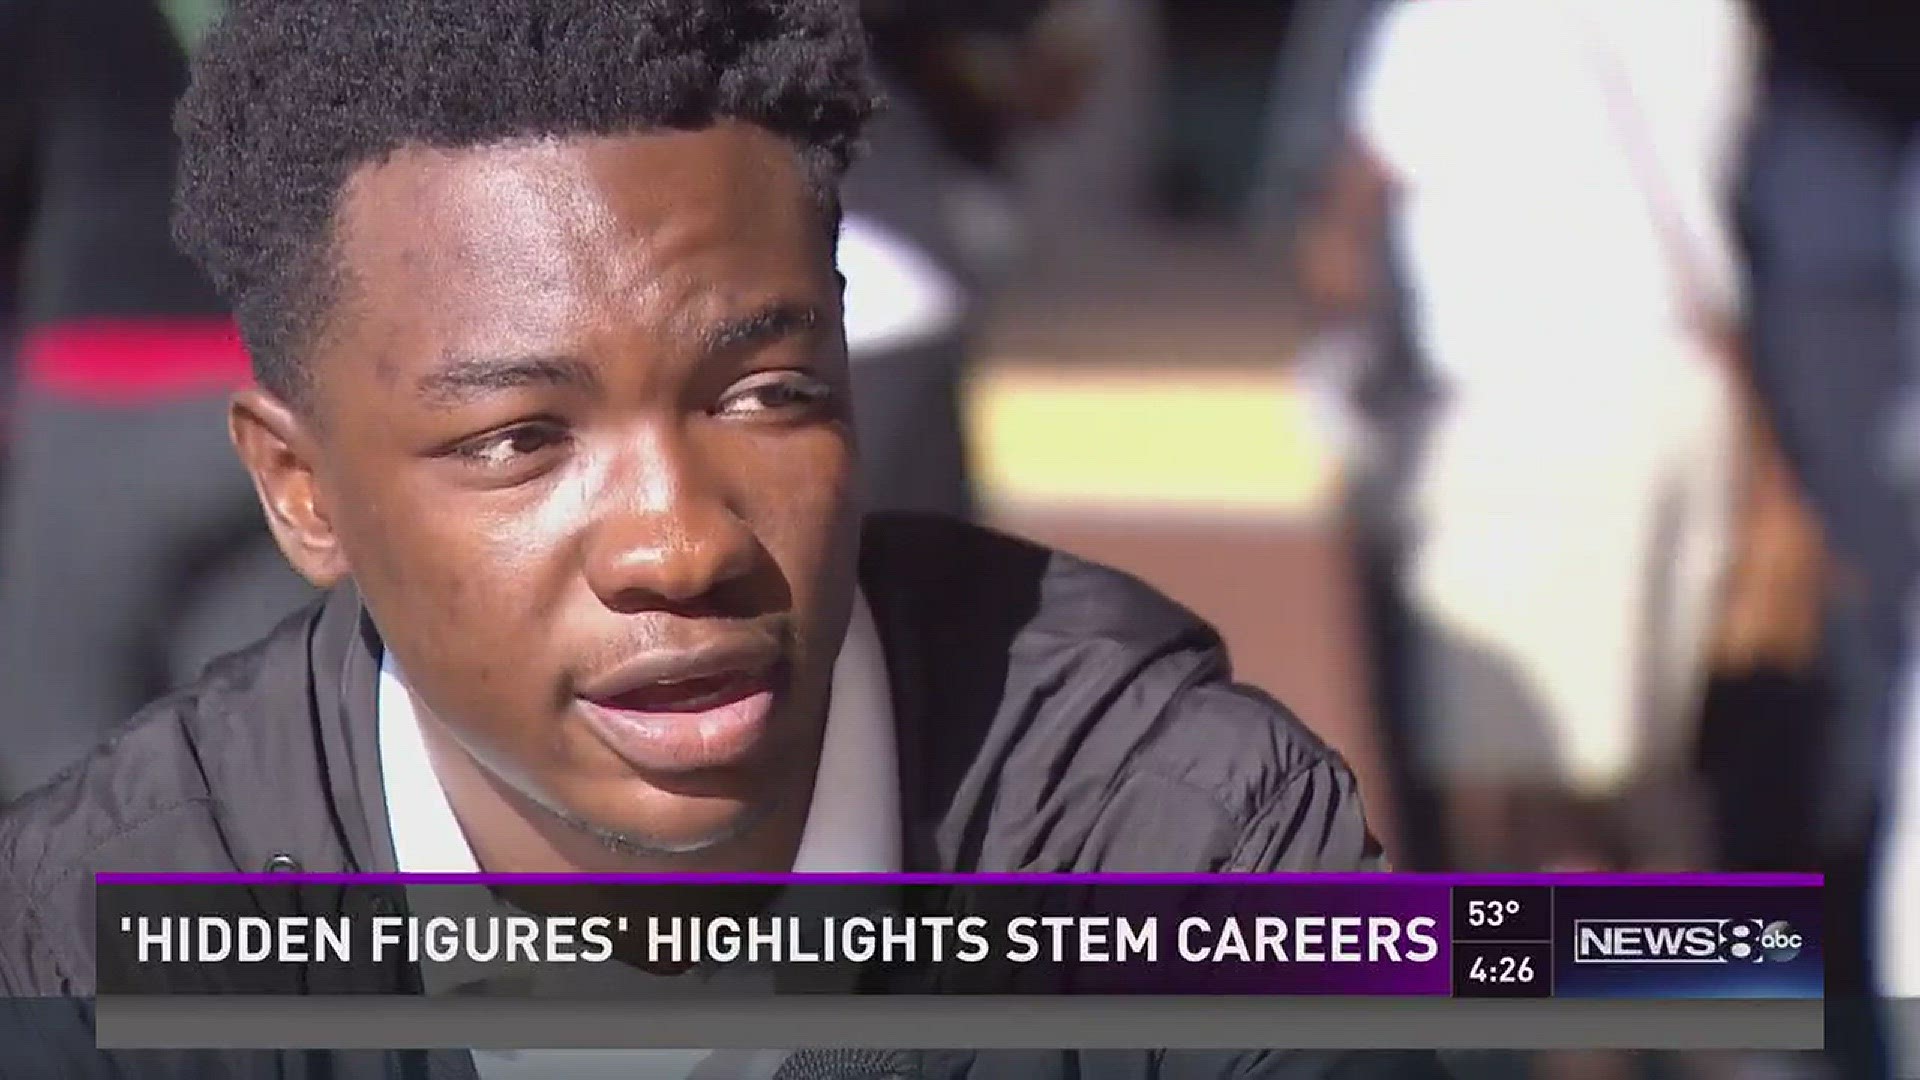 Marcus Moore has details on how a new blockbuster film is highlighting careers in science, tech, engineering and math.